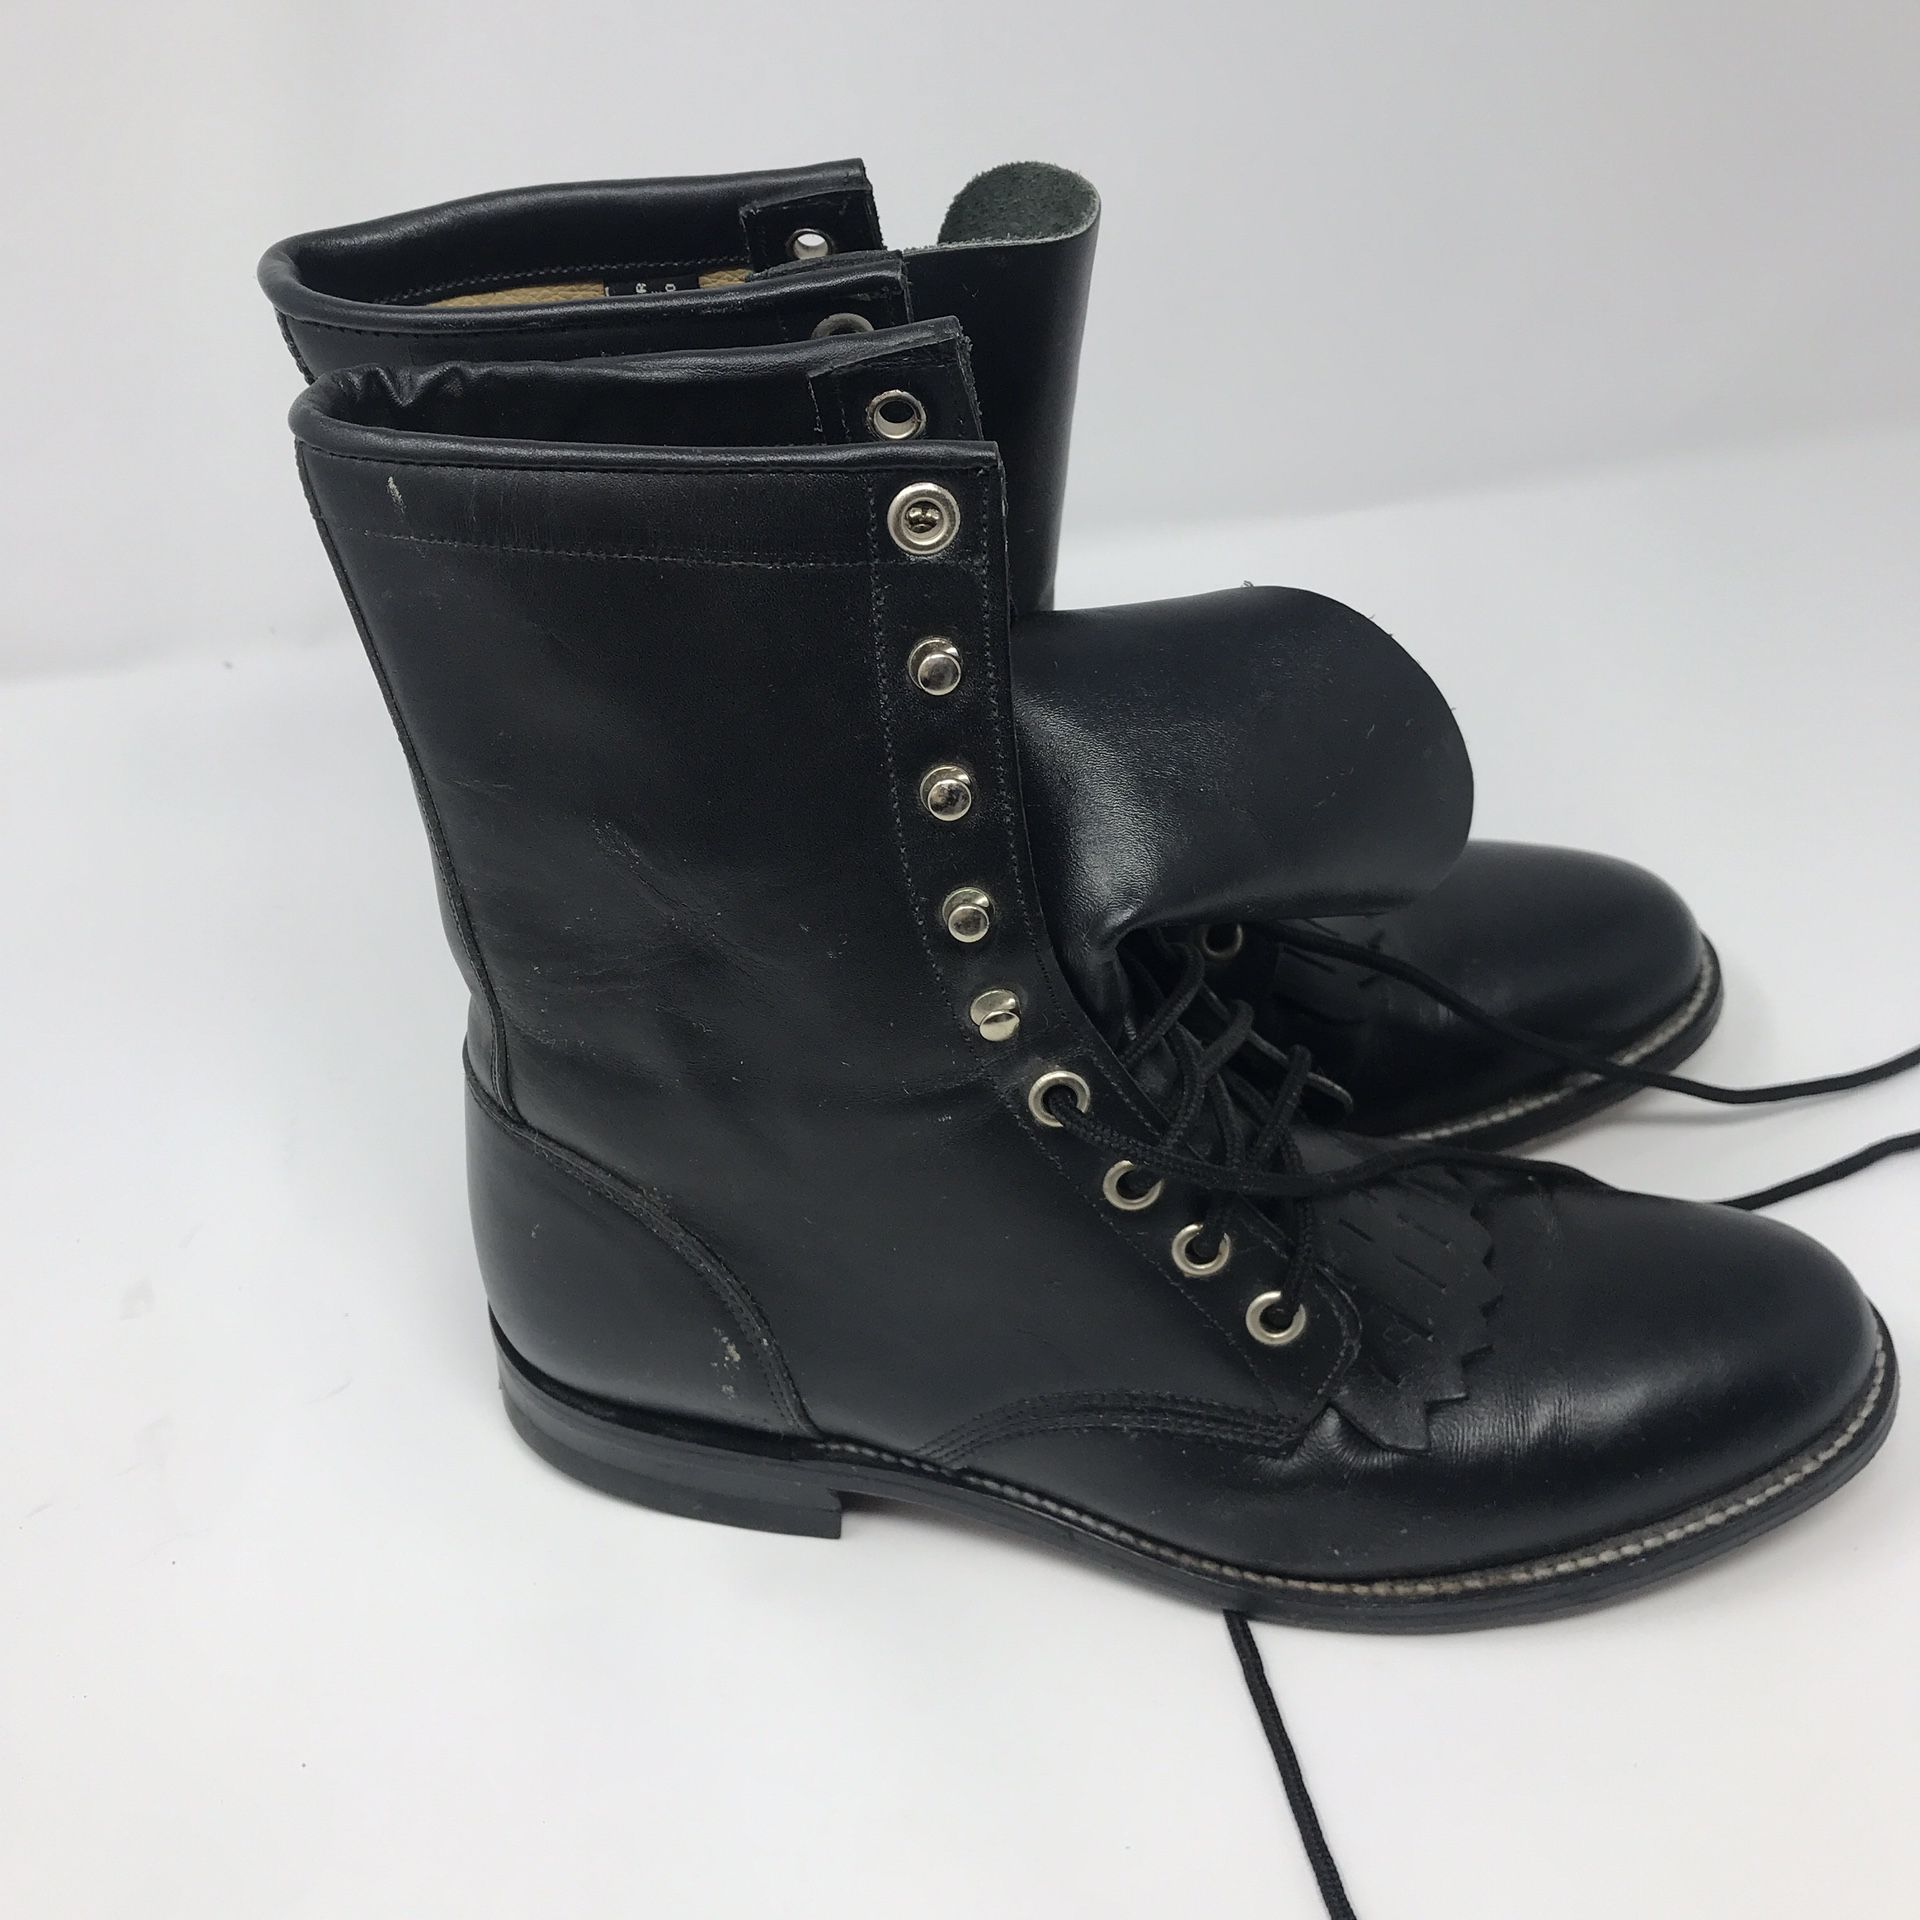 Justin 0506 Lace Up Roper Boots Women’s Size 7 B